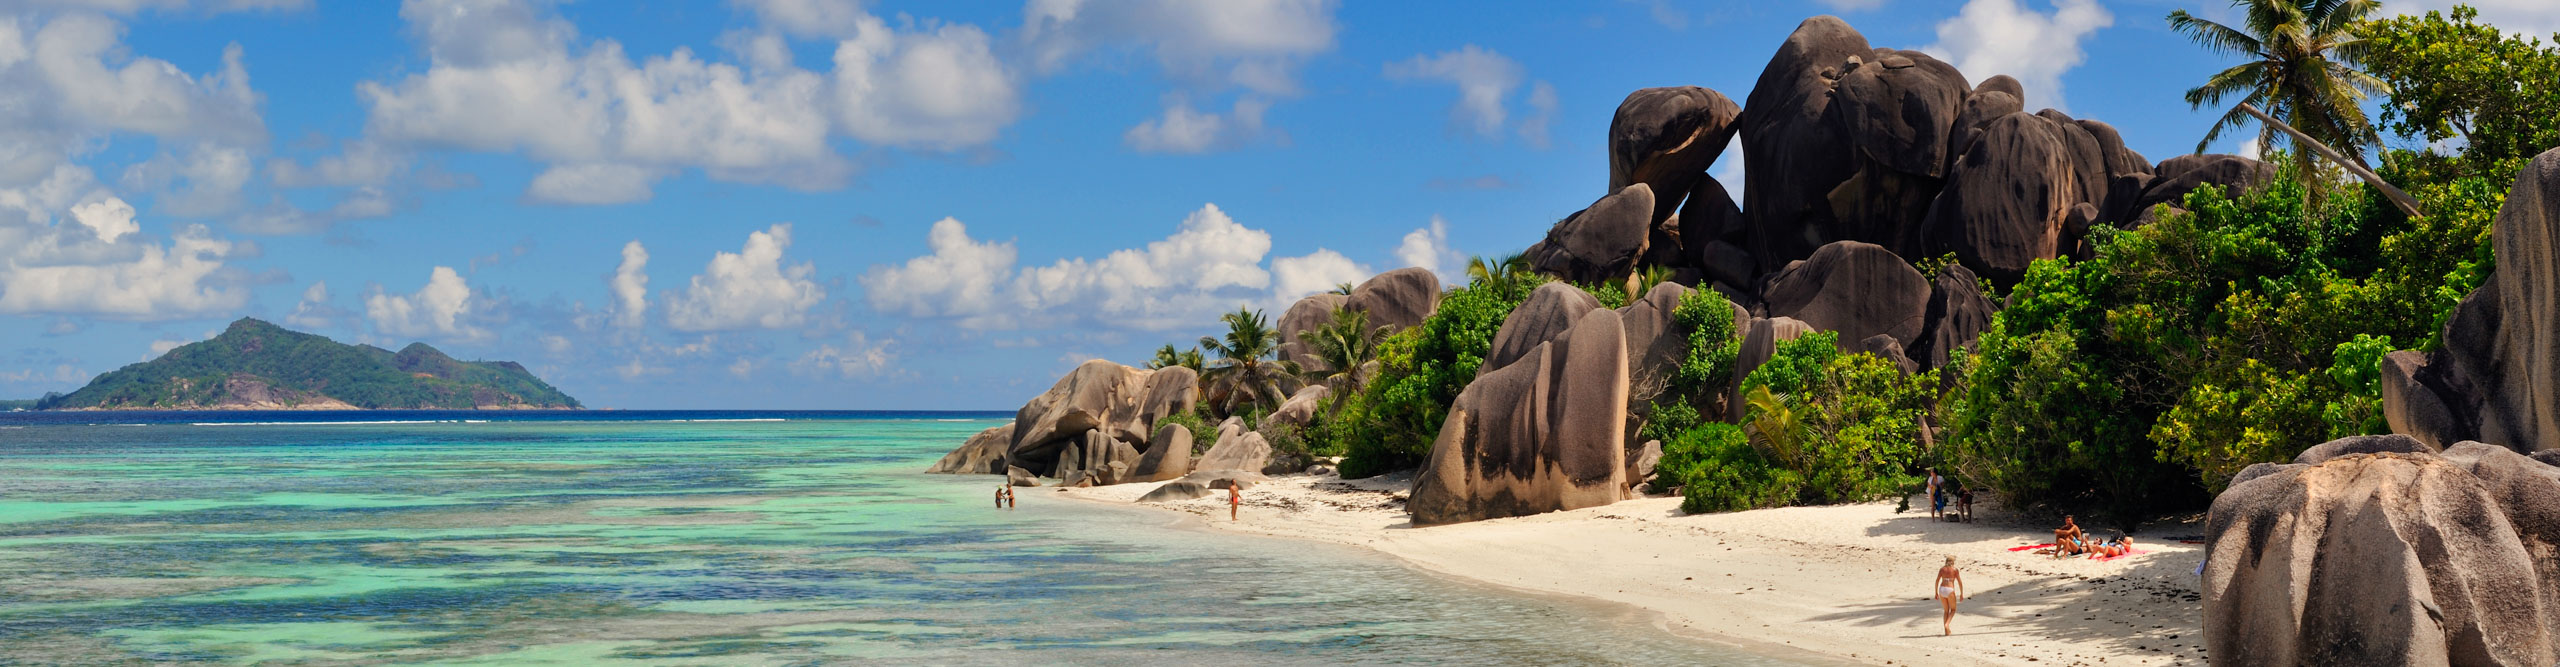 People on Source d'Argent beach, with a bright blue sky and turquoise water in the Seychelles